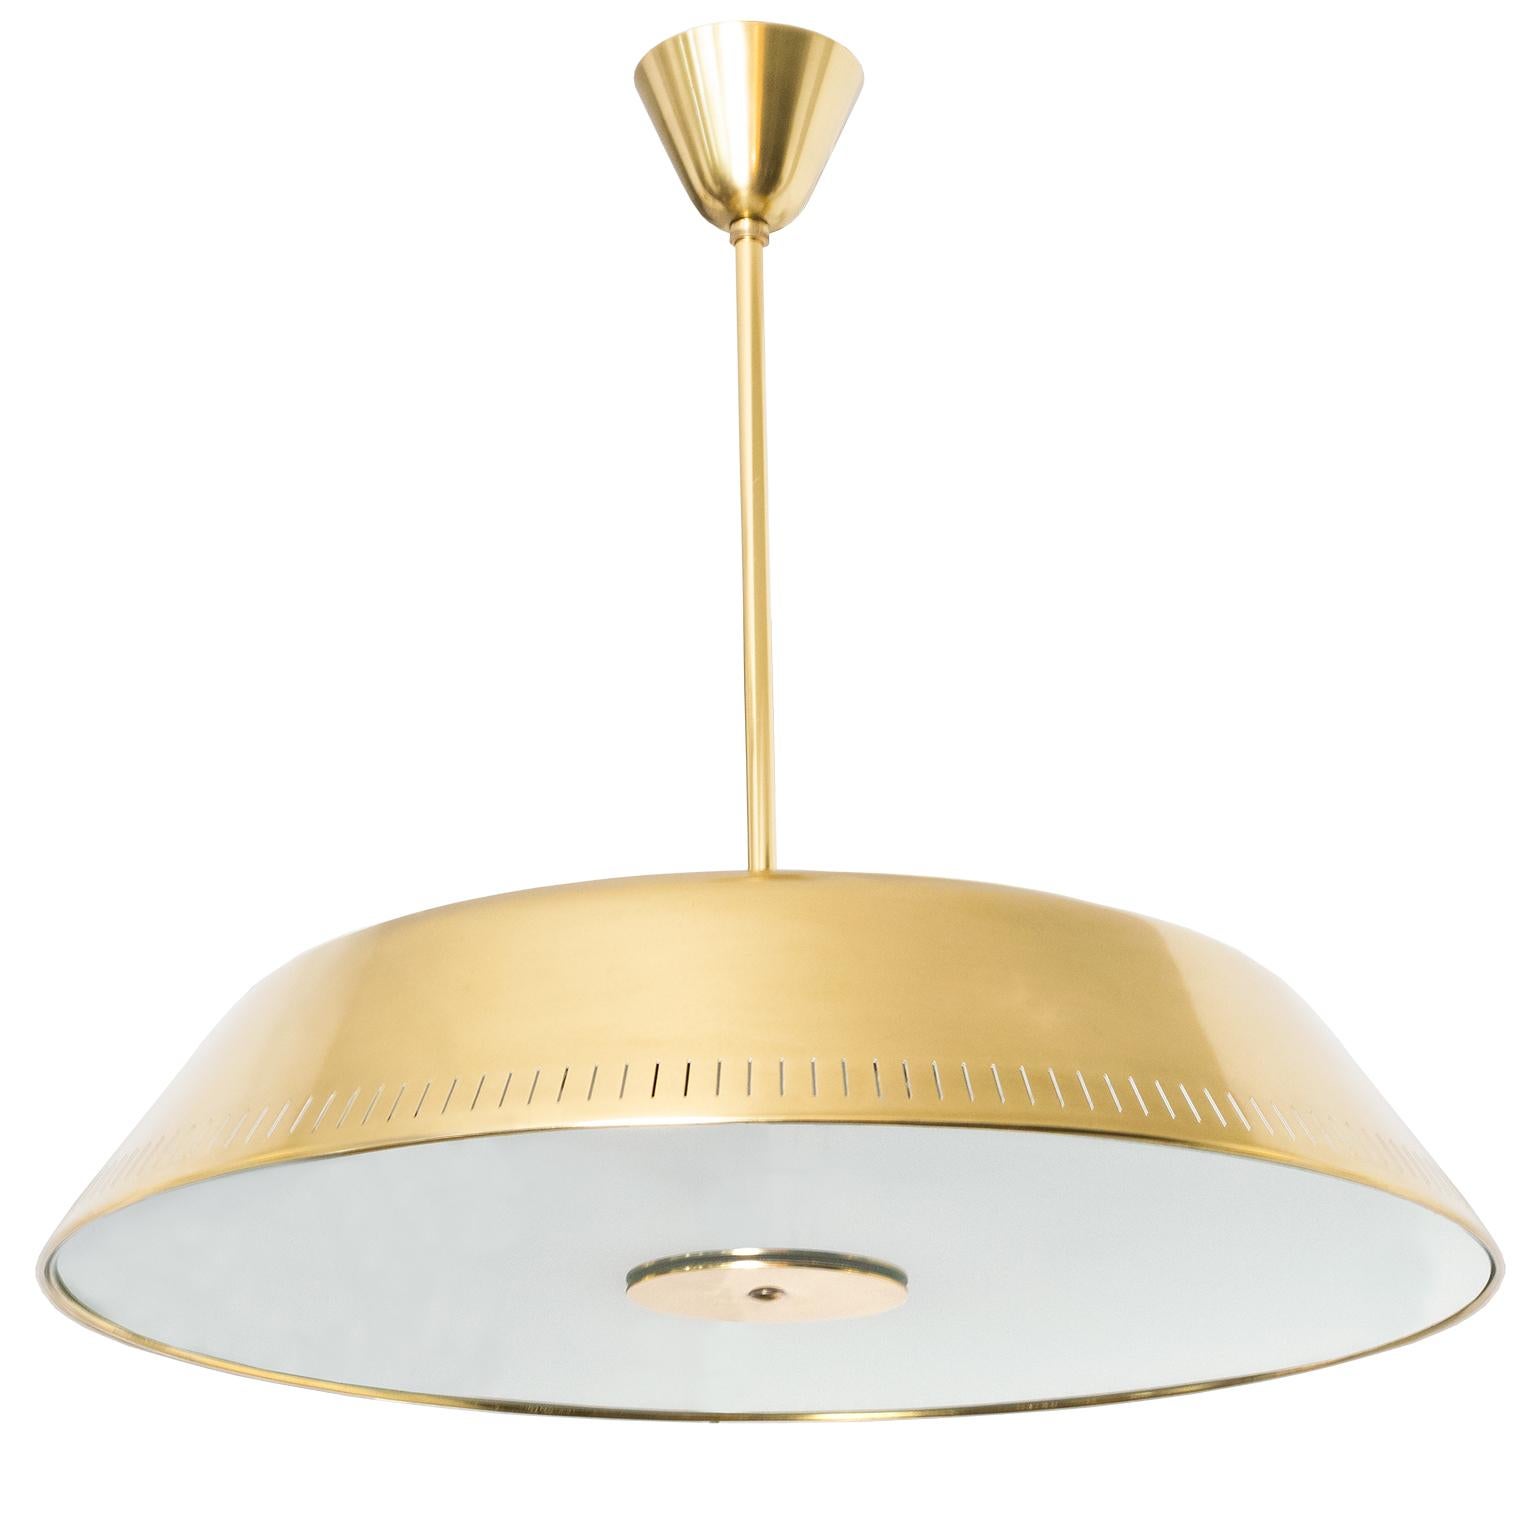 Sleek Scandinavian Modern polished brass and glass pendant designed by Harald Notini made by Böhlmarks, Sweden. This fixture has been completely restored and newly rewired with 6 internal standard base sockets and 3 additional sockets recessed on